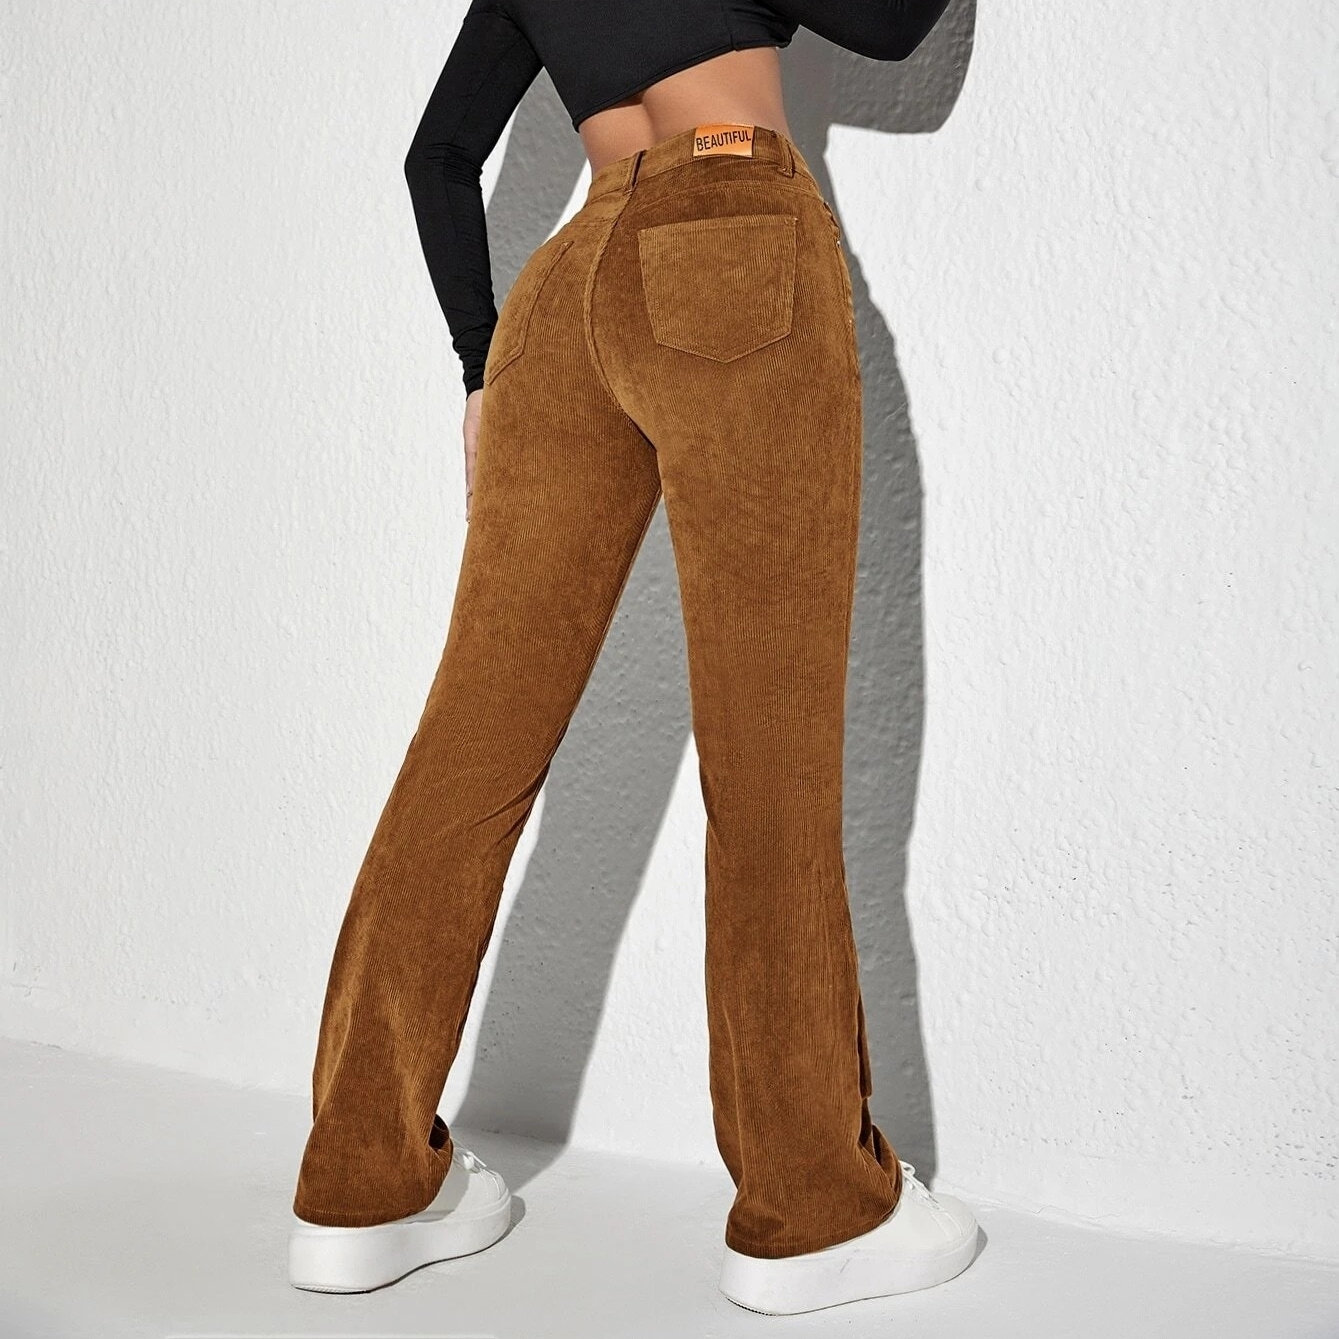 Letter Patched Flare Leg Corduroy Pants - Brown, M